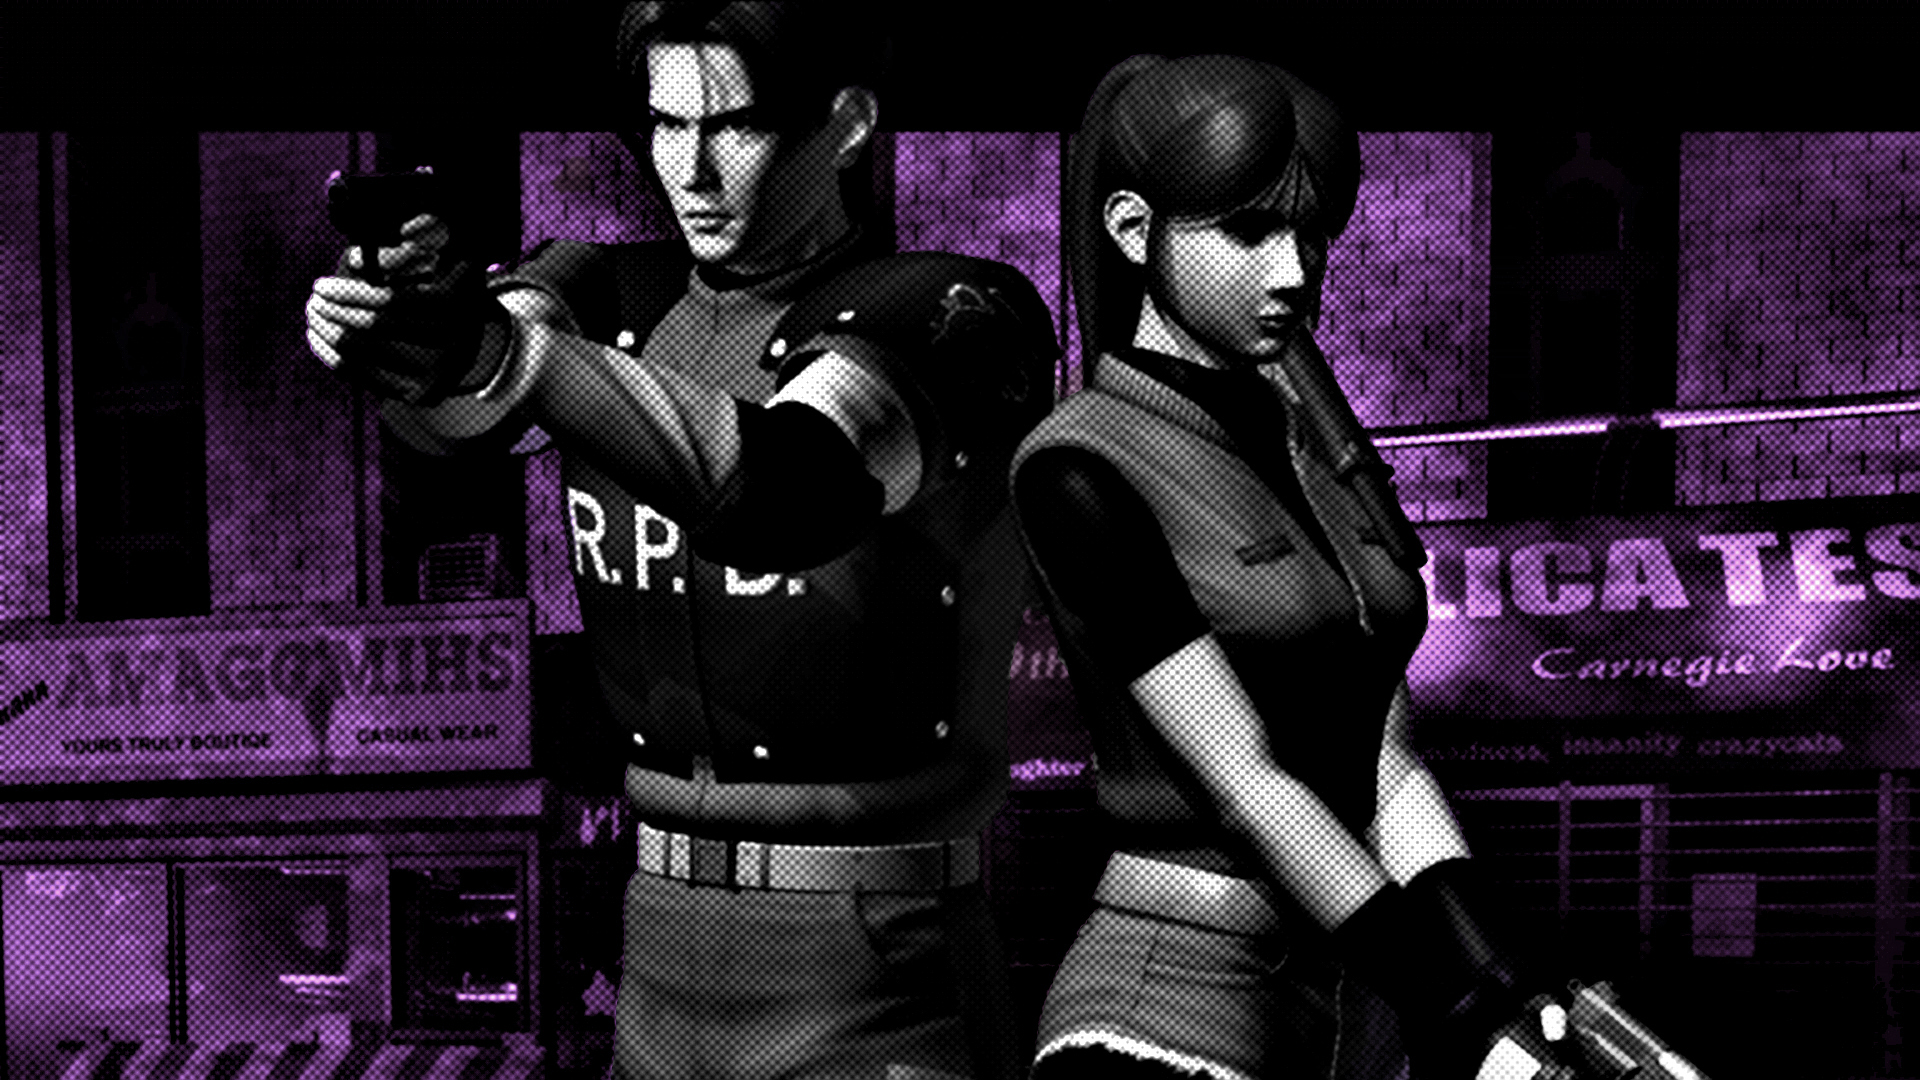 The PlayStation versions of Leon and Claire